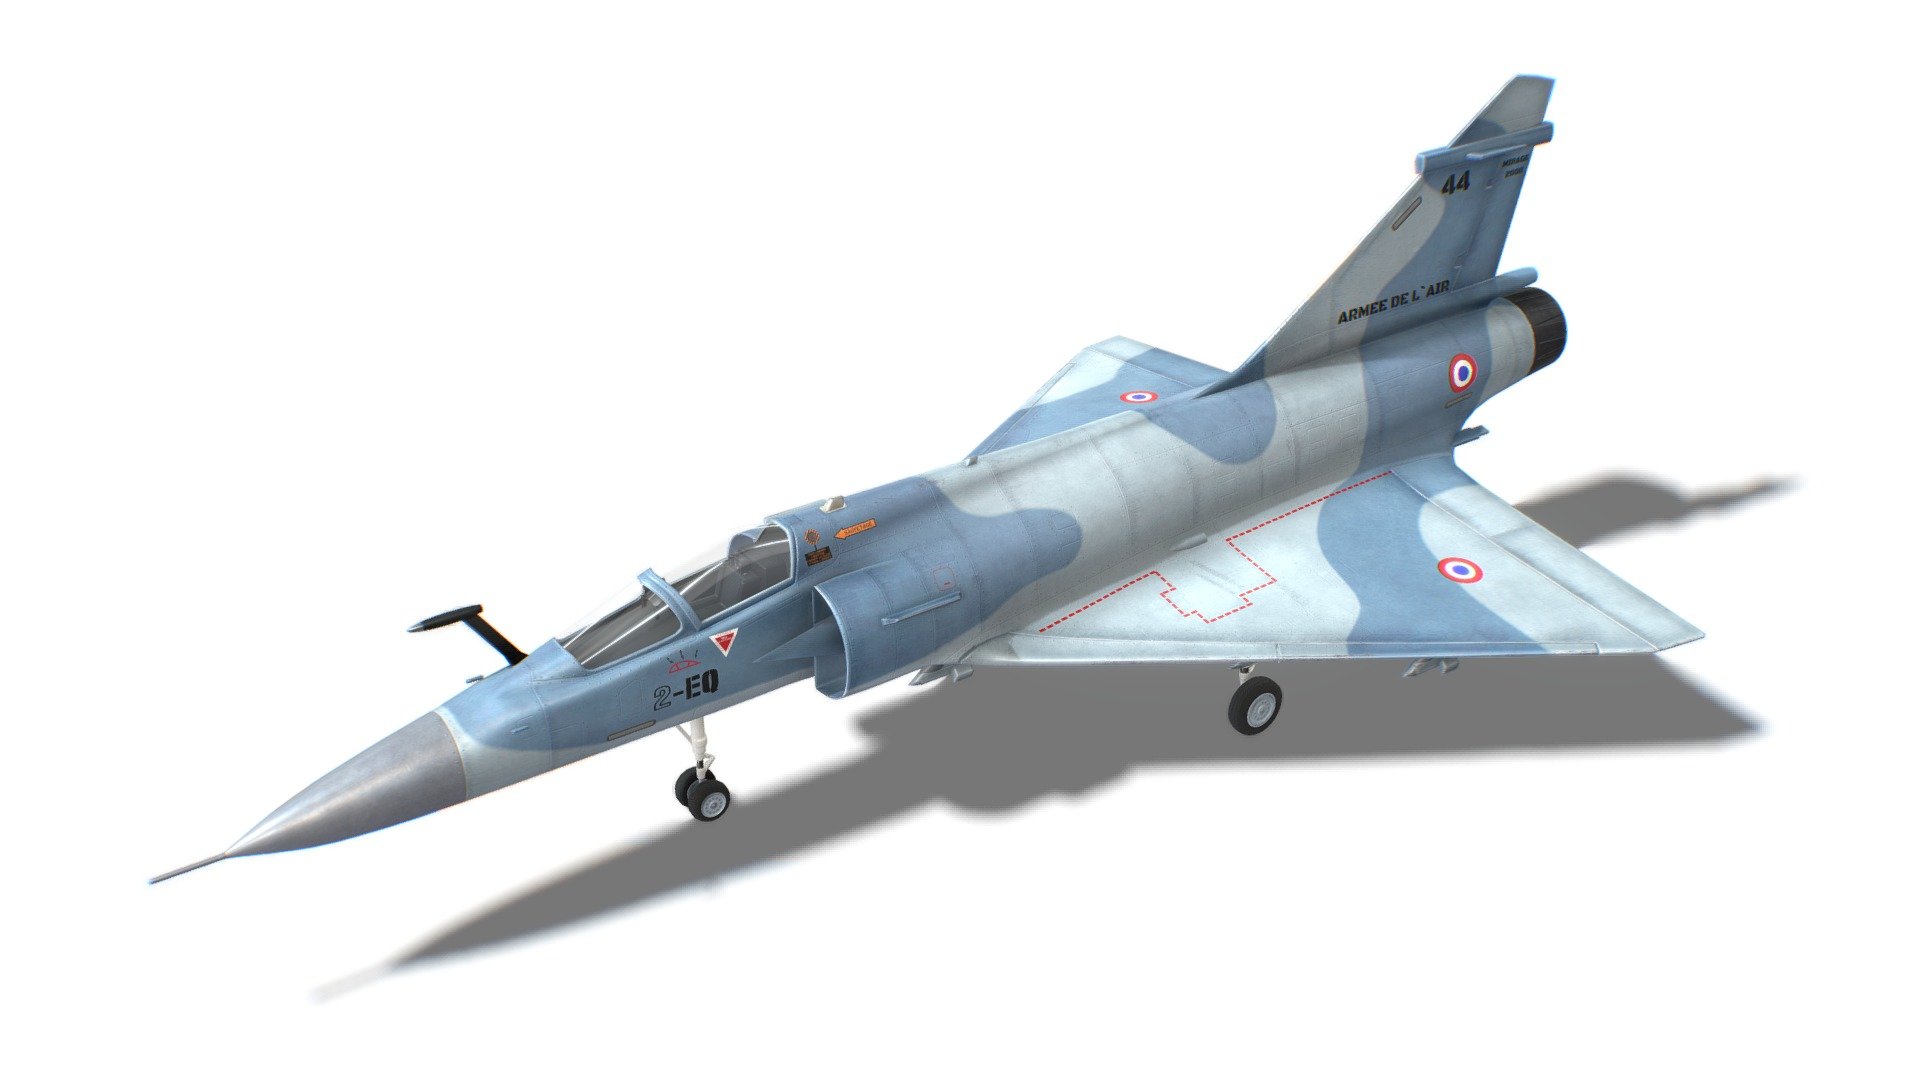 The model looks like a Mirage 2000. All parts of the model were made in full accordance with the original. Each dynamical part is separated and has correct pivot points, that allow easy animation and use in games. 

Advanced information:
- single material for whole mesh;
- set of 4K PBR textures;
- set of 4K Unreal PBR textures;
- set of 4K Unity PBR textures;
- set of 4K CryEngine PBR textures;
- FBX, DAE, ABC, OBJ and X3D file formats;
- 4 level of details;

Mesh details:
LOD0 - 12420
LOD1 - 6209
LOD2 - 3104
LOD3 - 299 - Mirage 2000 Jet Fighter Aircraft - 3D model by FreakGames 3d model